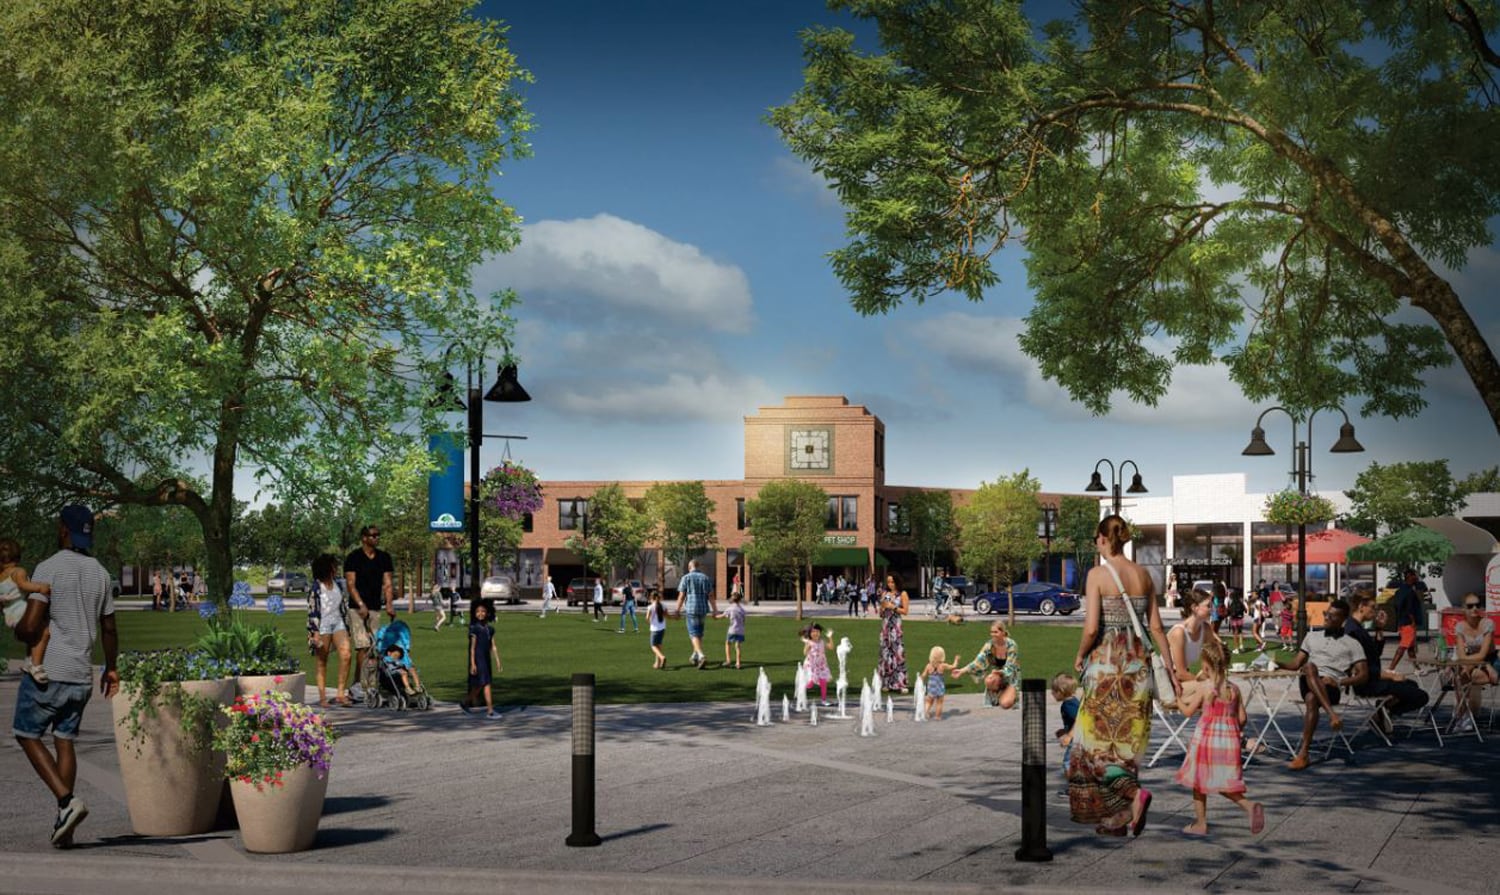 The Grove is a planned development proposed for the village of Sugar Grove. This conceptual rendering shows the proposed The Grove Town Center, that would include a village hall, entertainment venues and community gathering spaces, such as a beer garden, food truck court, pickleball courts, splash pad and access to five miles of walking/biking trails.